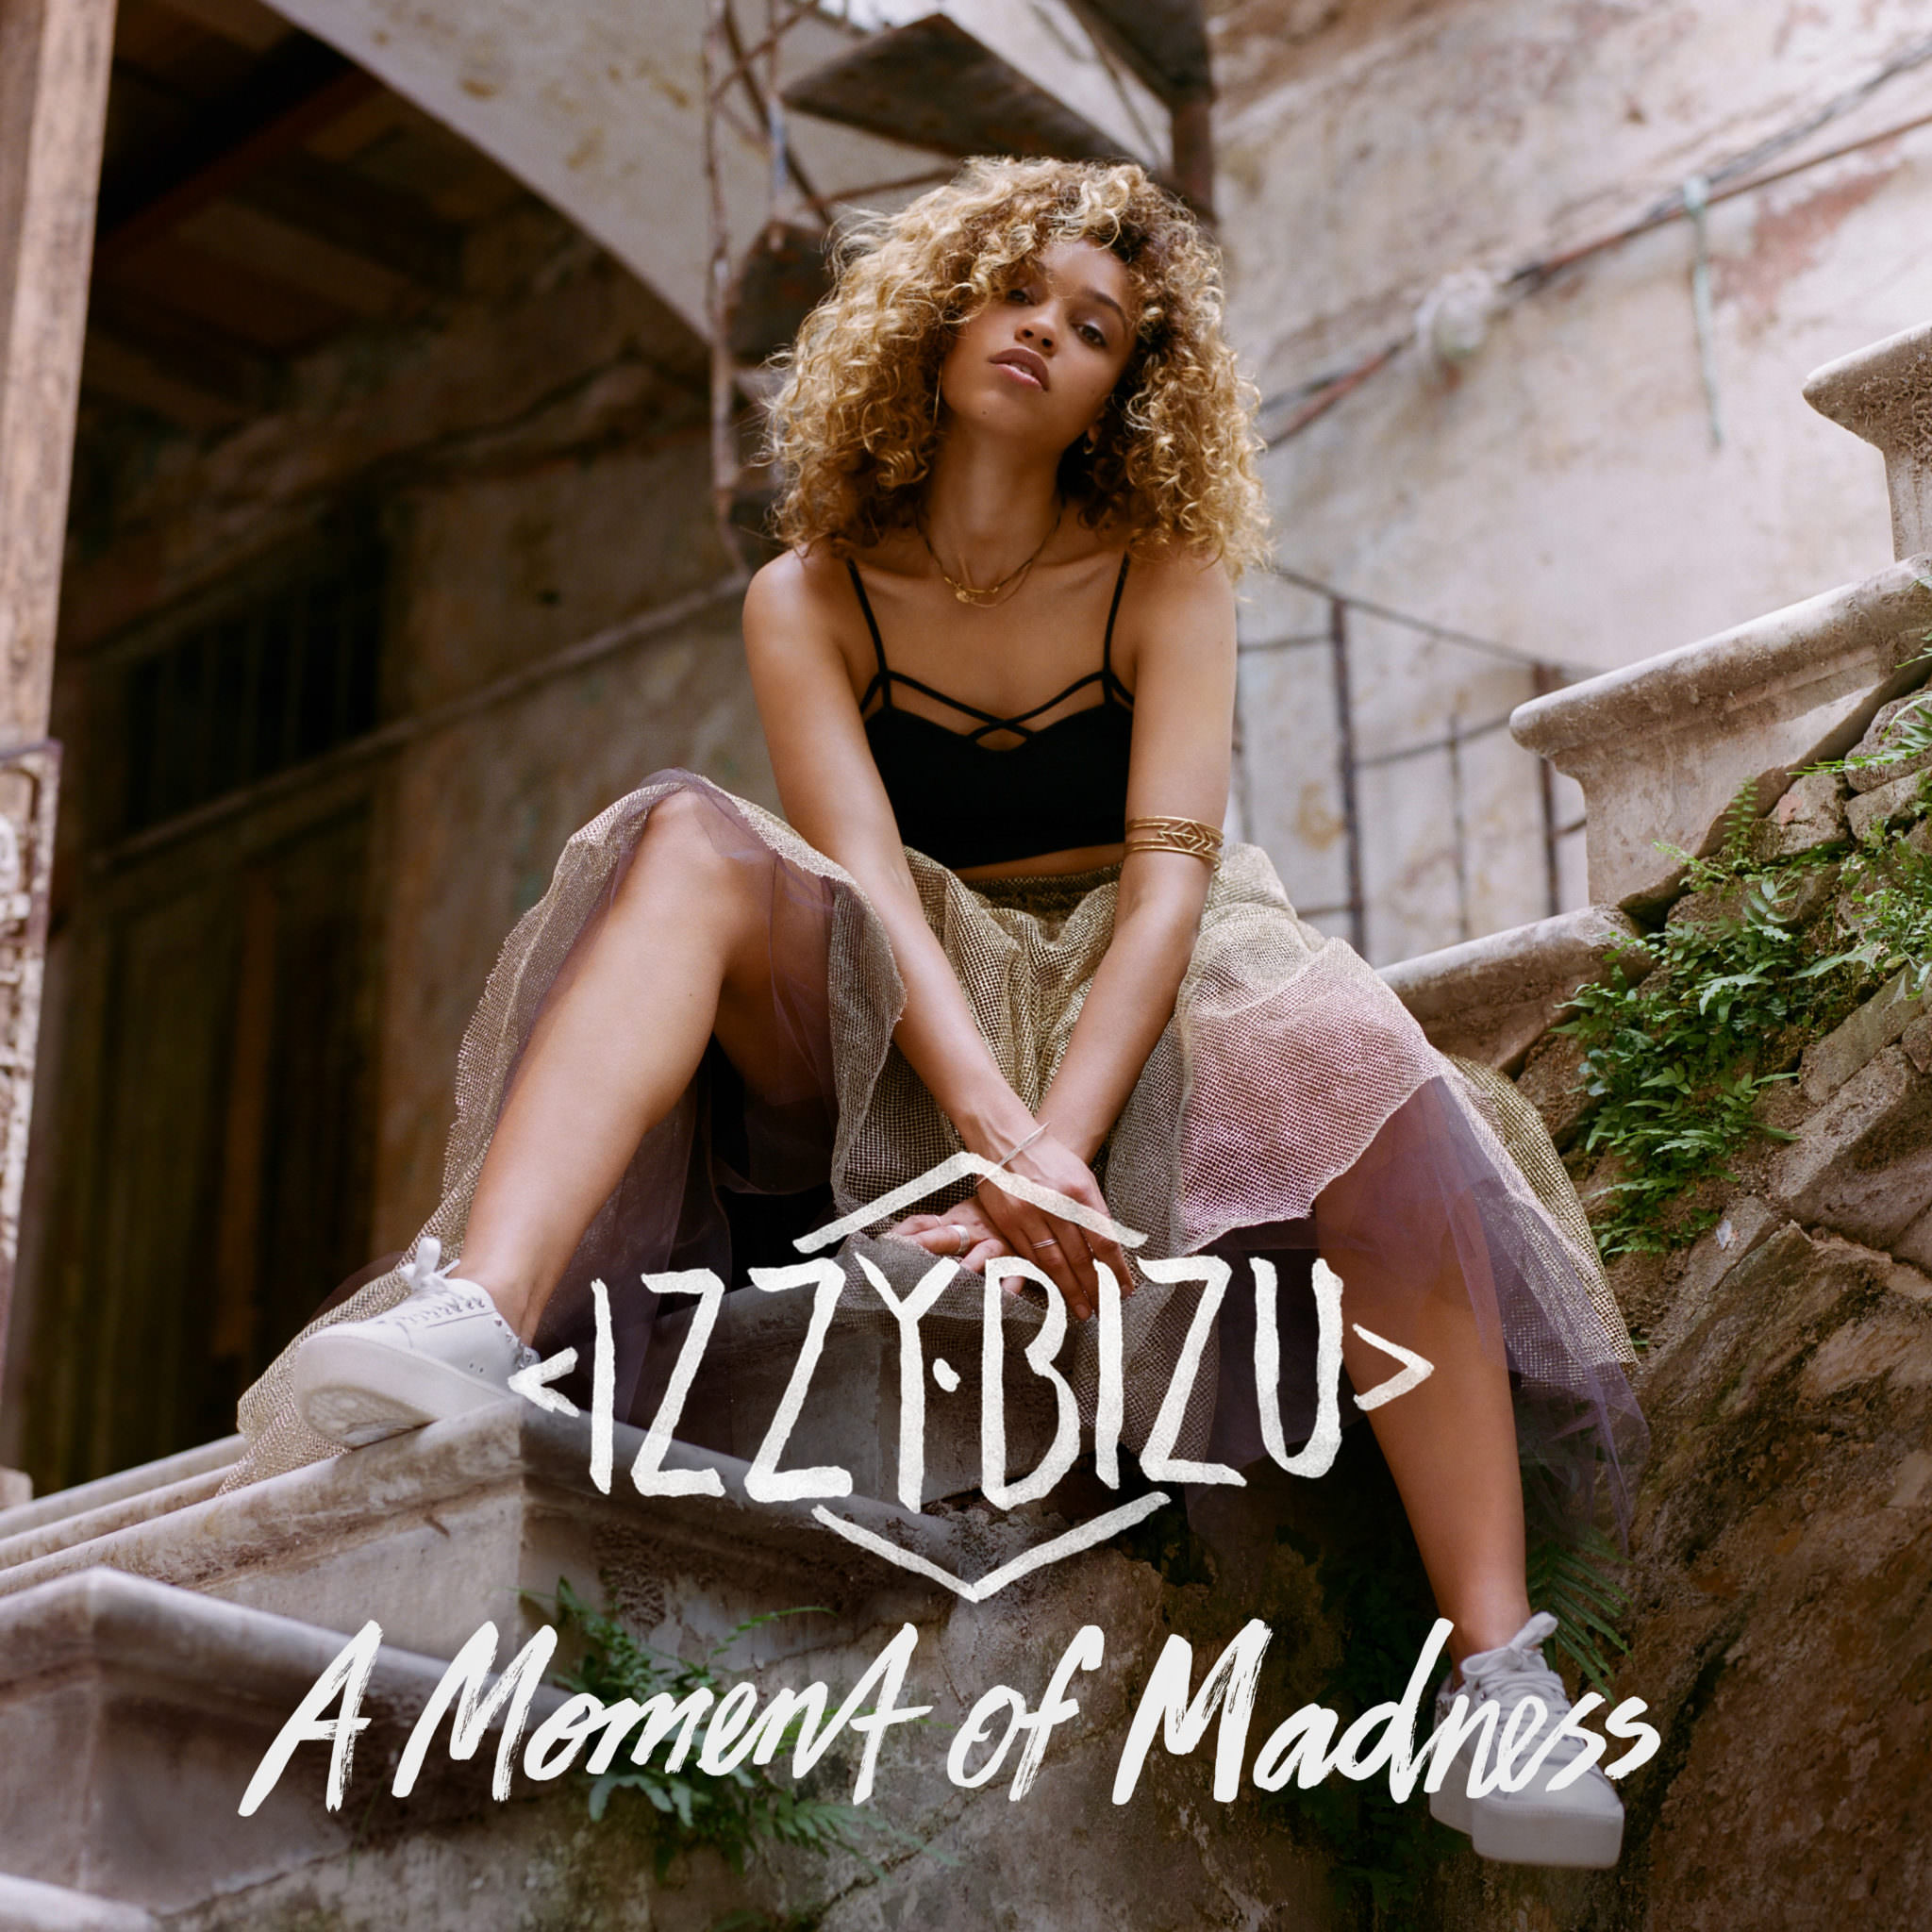 Izzy Bizu - A Moment Of Madness {Deluxe Edition} (2016) [Qobuz FLAC 24bit/44,1kHz]